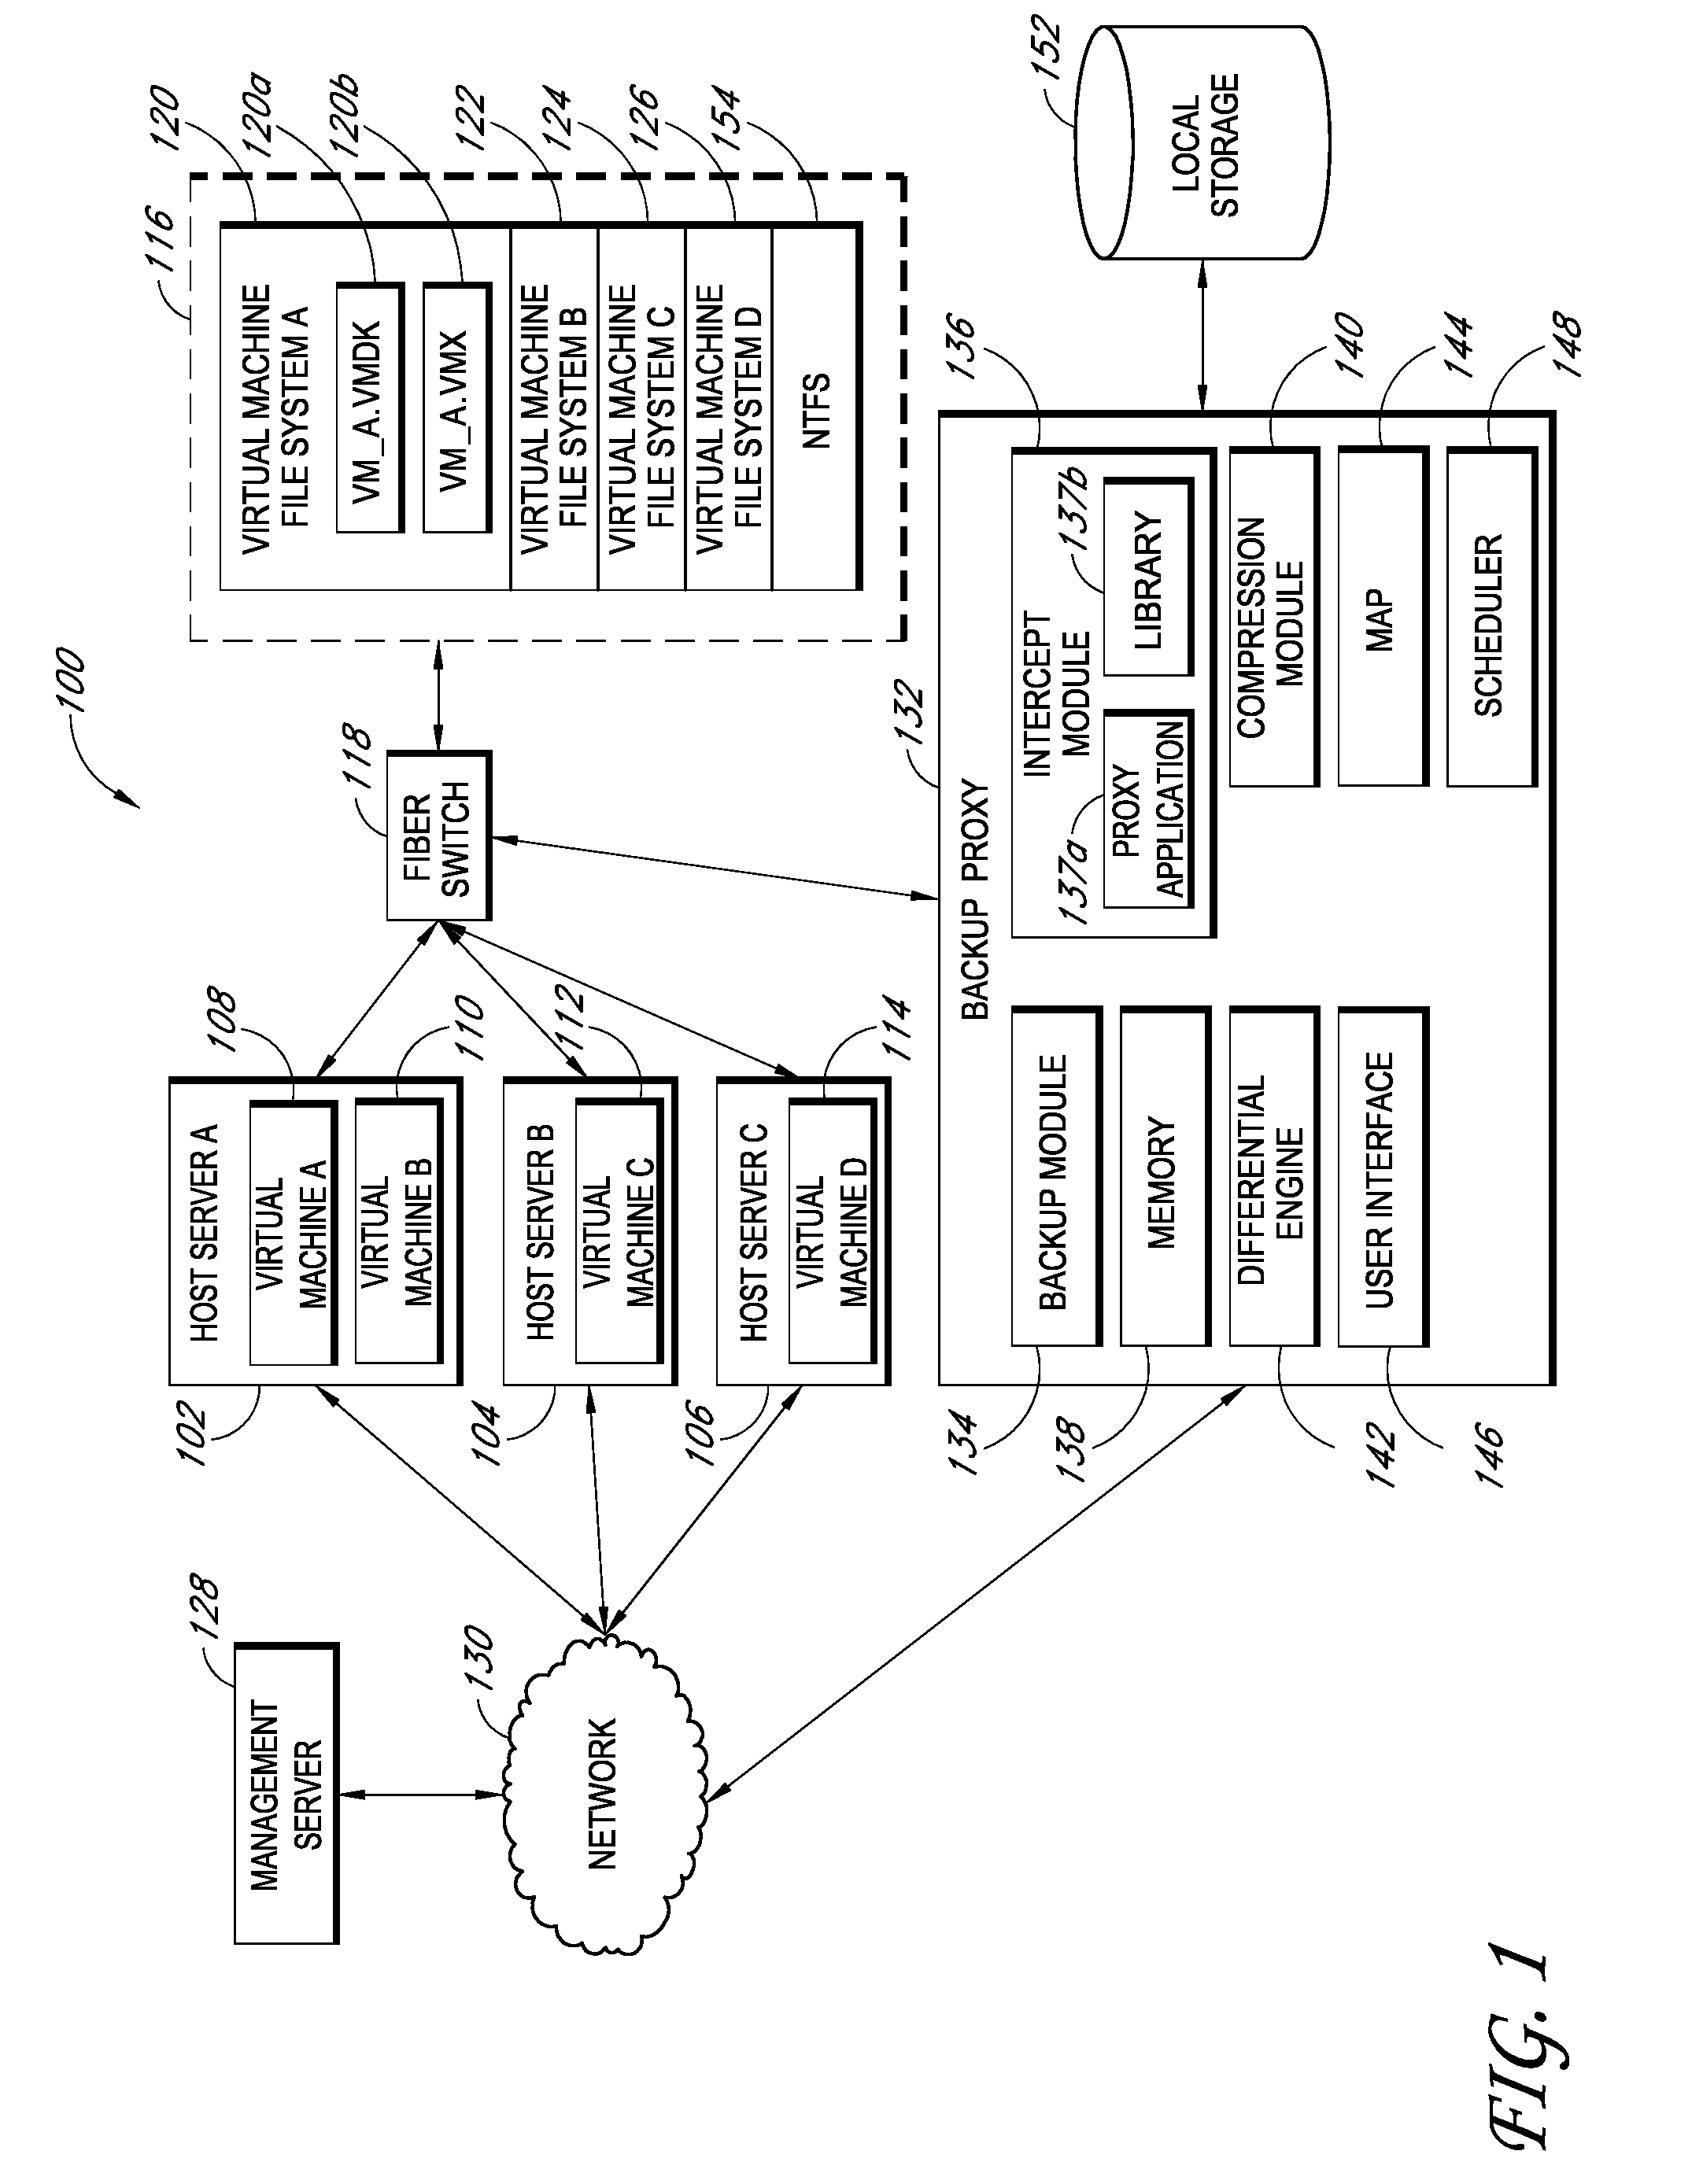 Backup systems and methods for a virtual computing environment